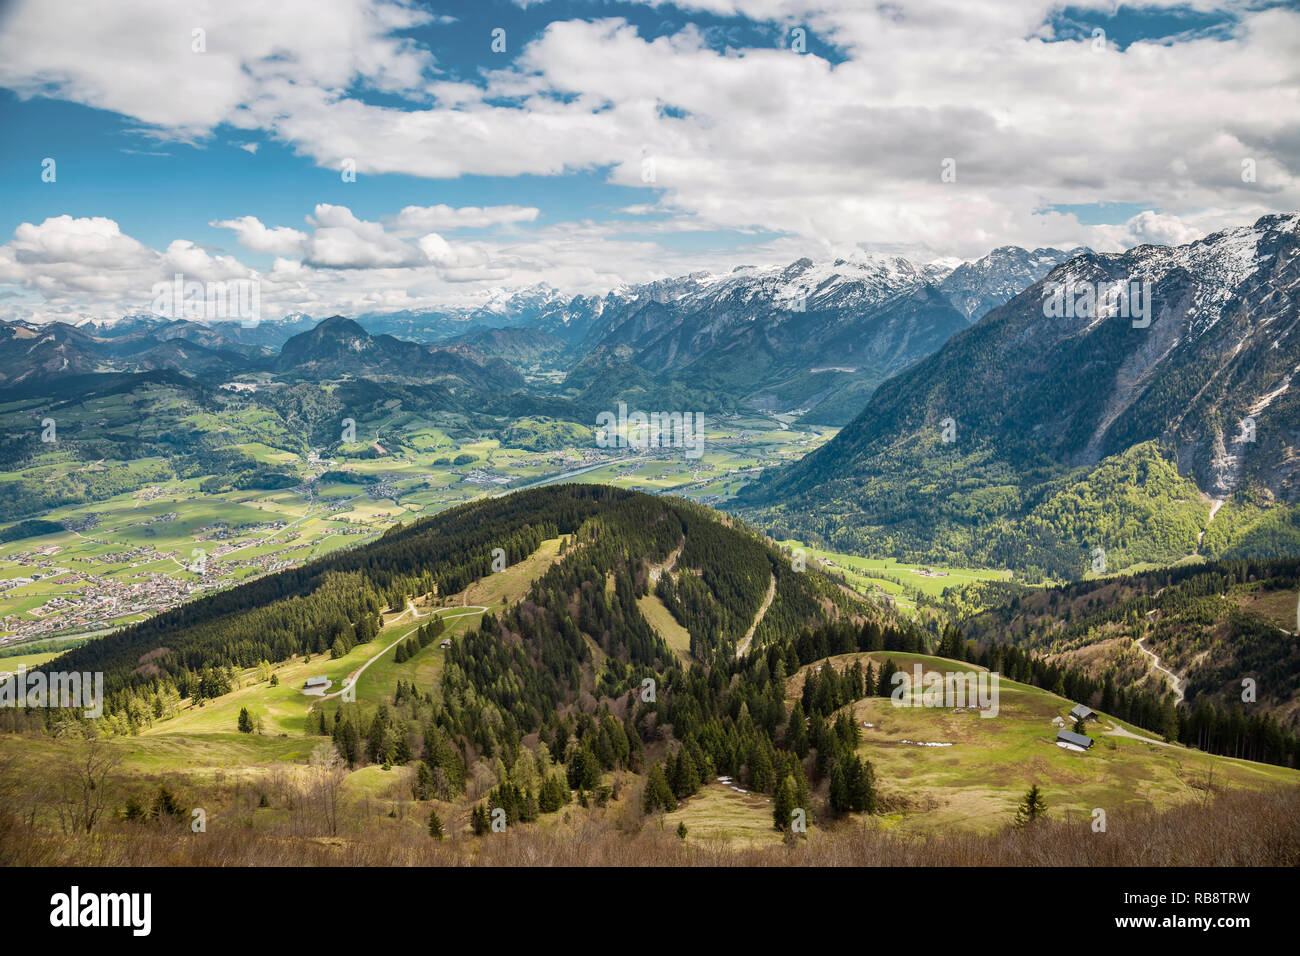 View over the mountains from Rossfldstrasse over Salzburgerland Stock Photo